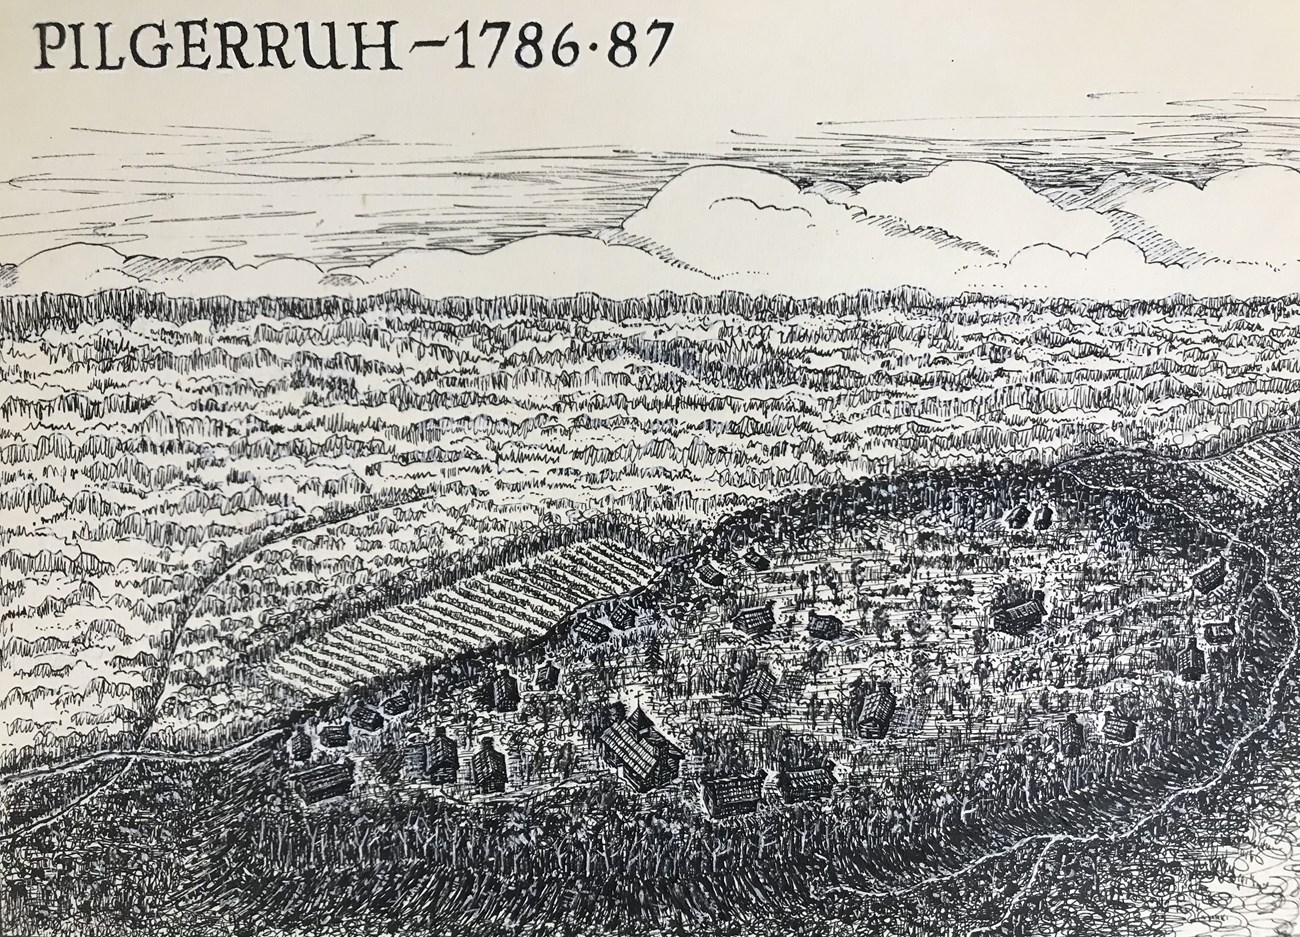 Pen and ink drawing of an aerial view of a village on a plateau surrounded by forest; the village is two dozen scattered wooden buildings including a chapel; text at top reads, "Pilgerruh - 1786-87."